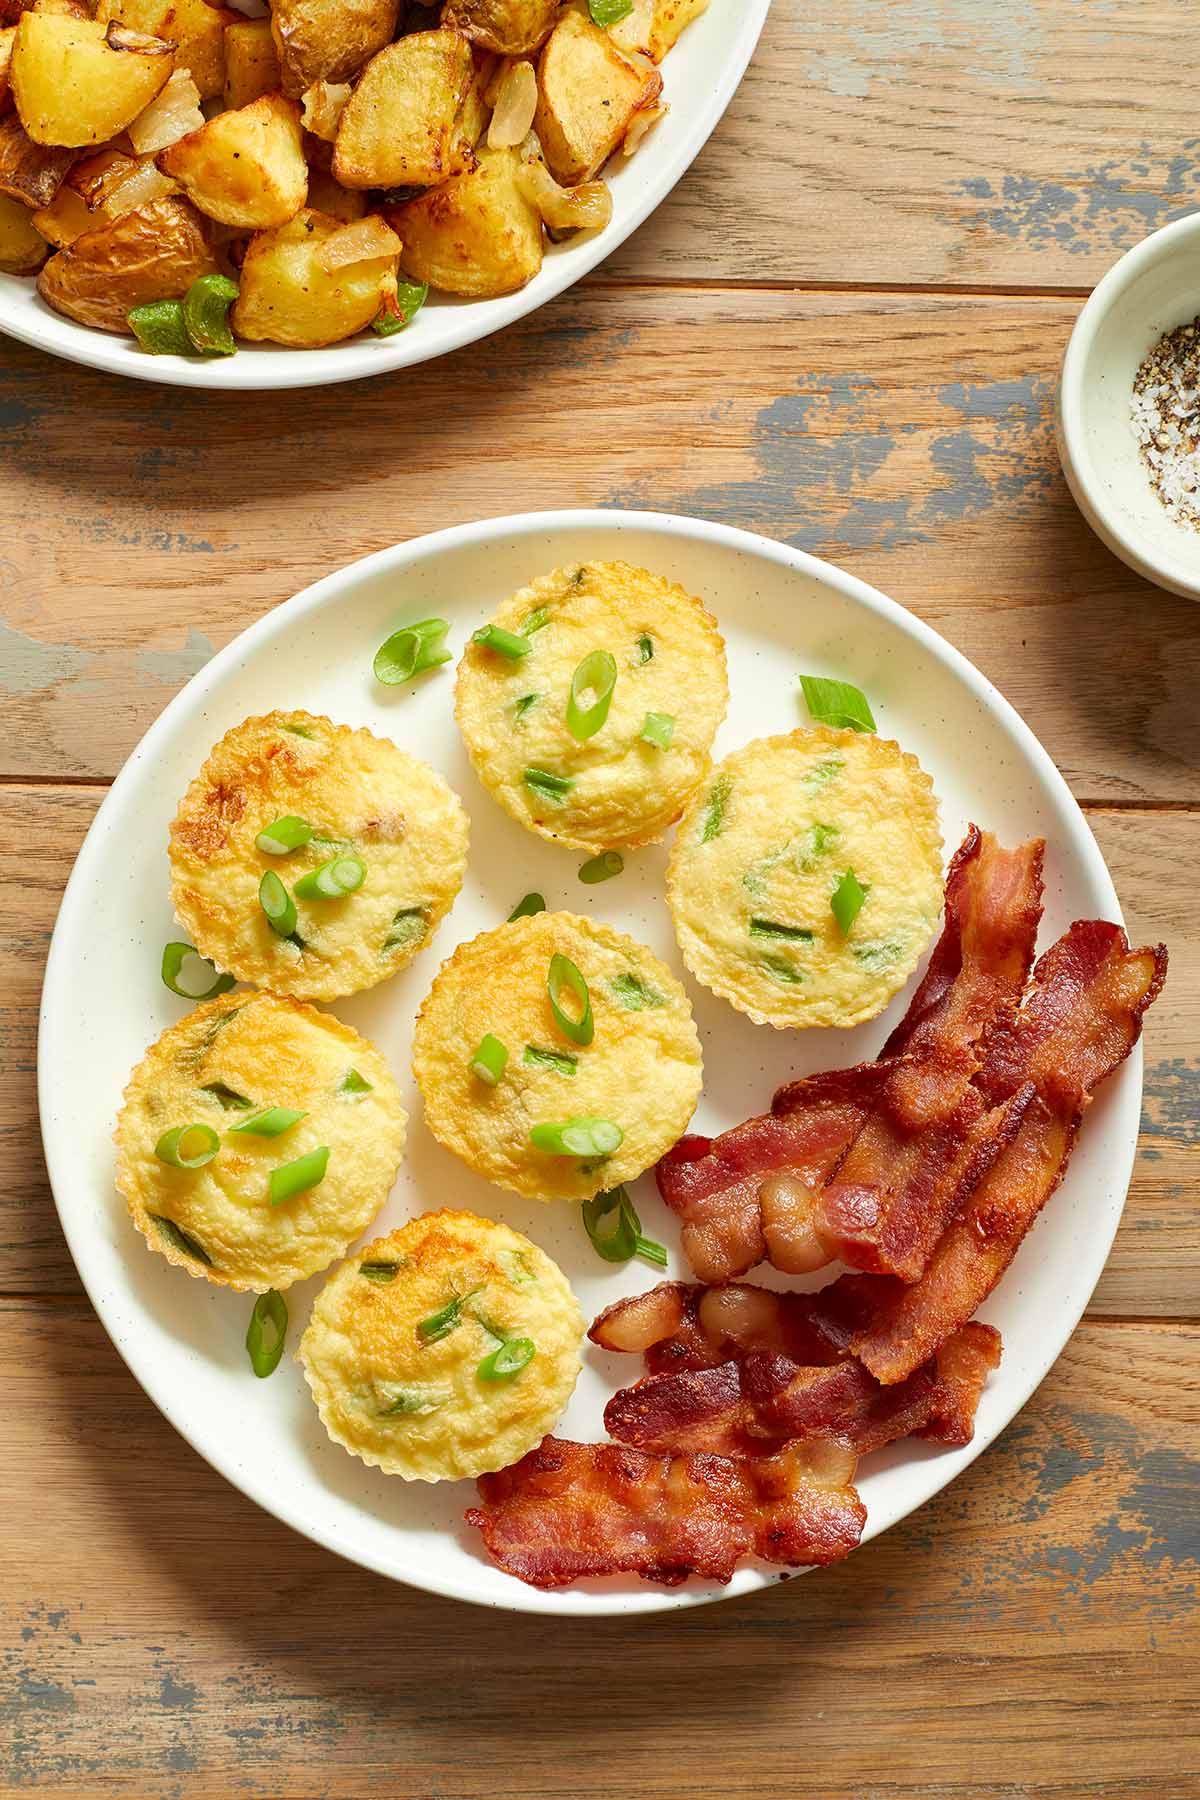 Egg muffins on a plate with slices of bacon and a plate of home fries on the side.